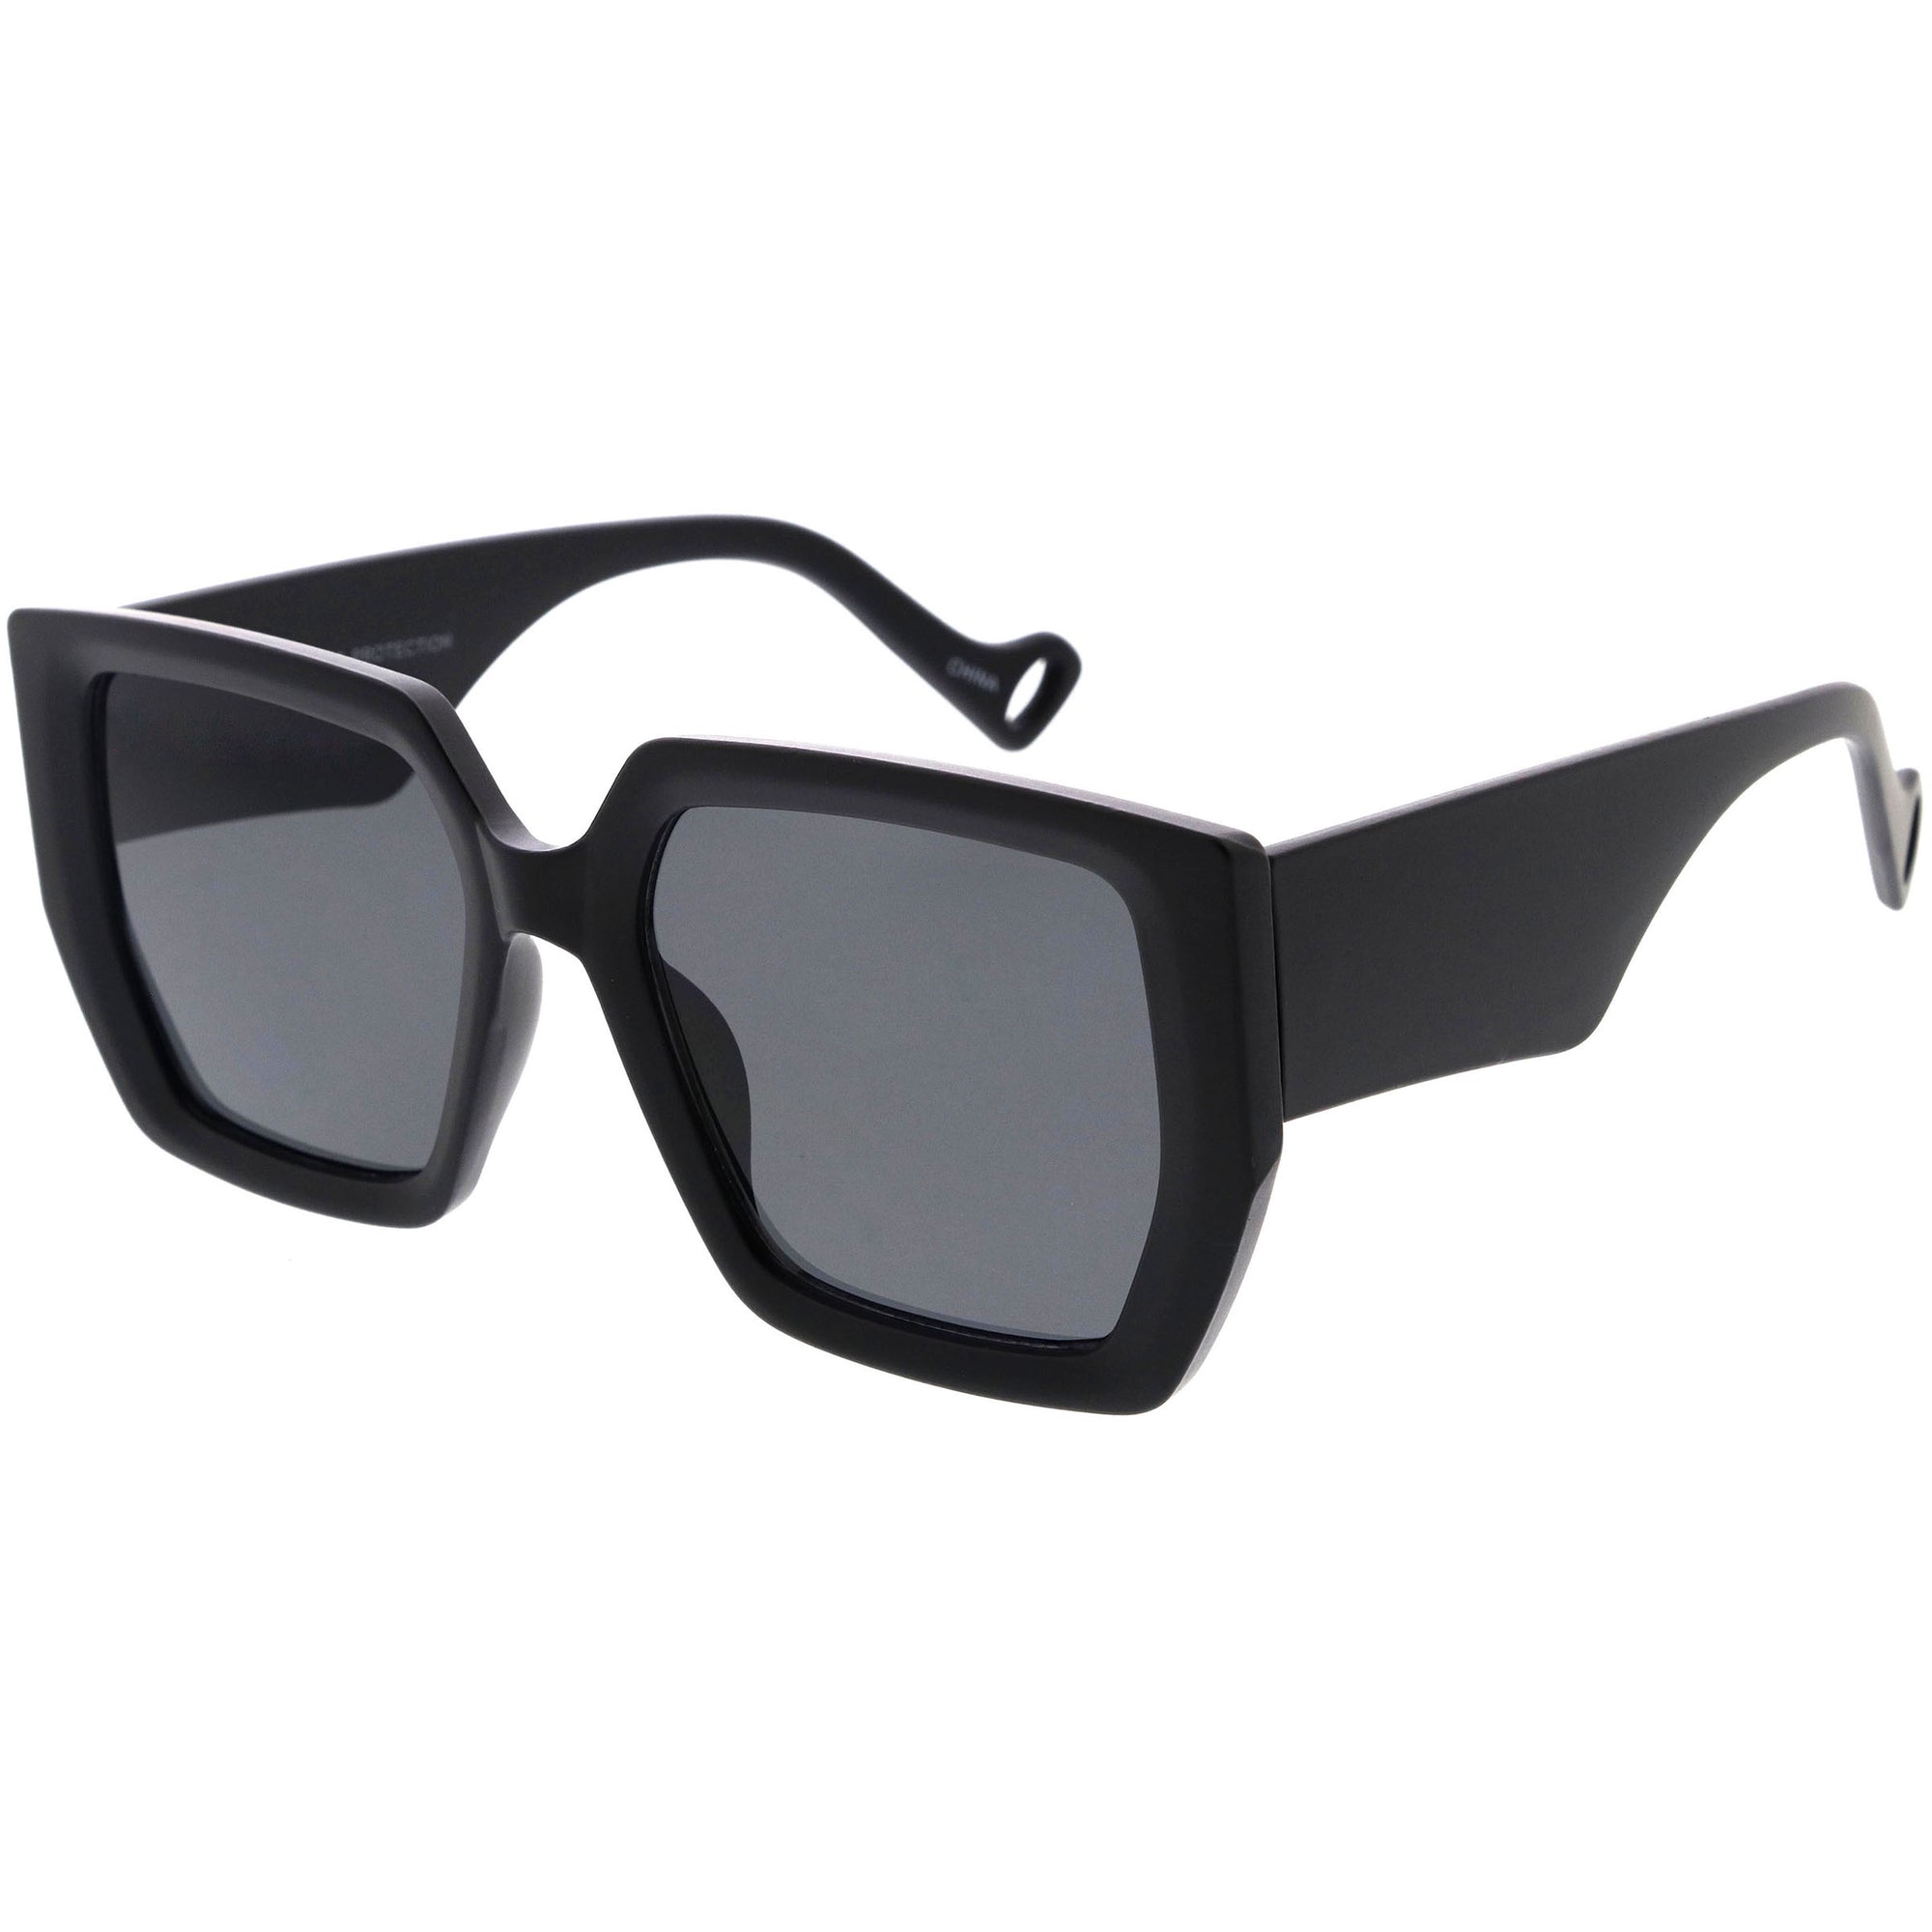 Oversized High Fashion Thick Rimmed Square Sunglasses D235 - zeroUV